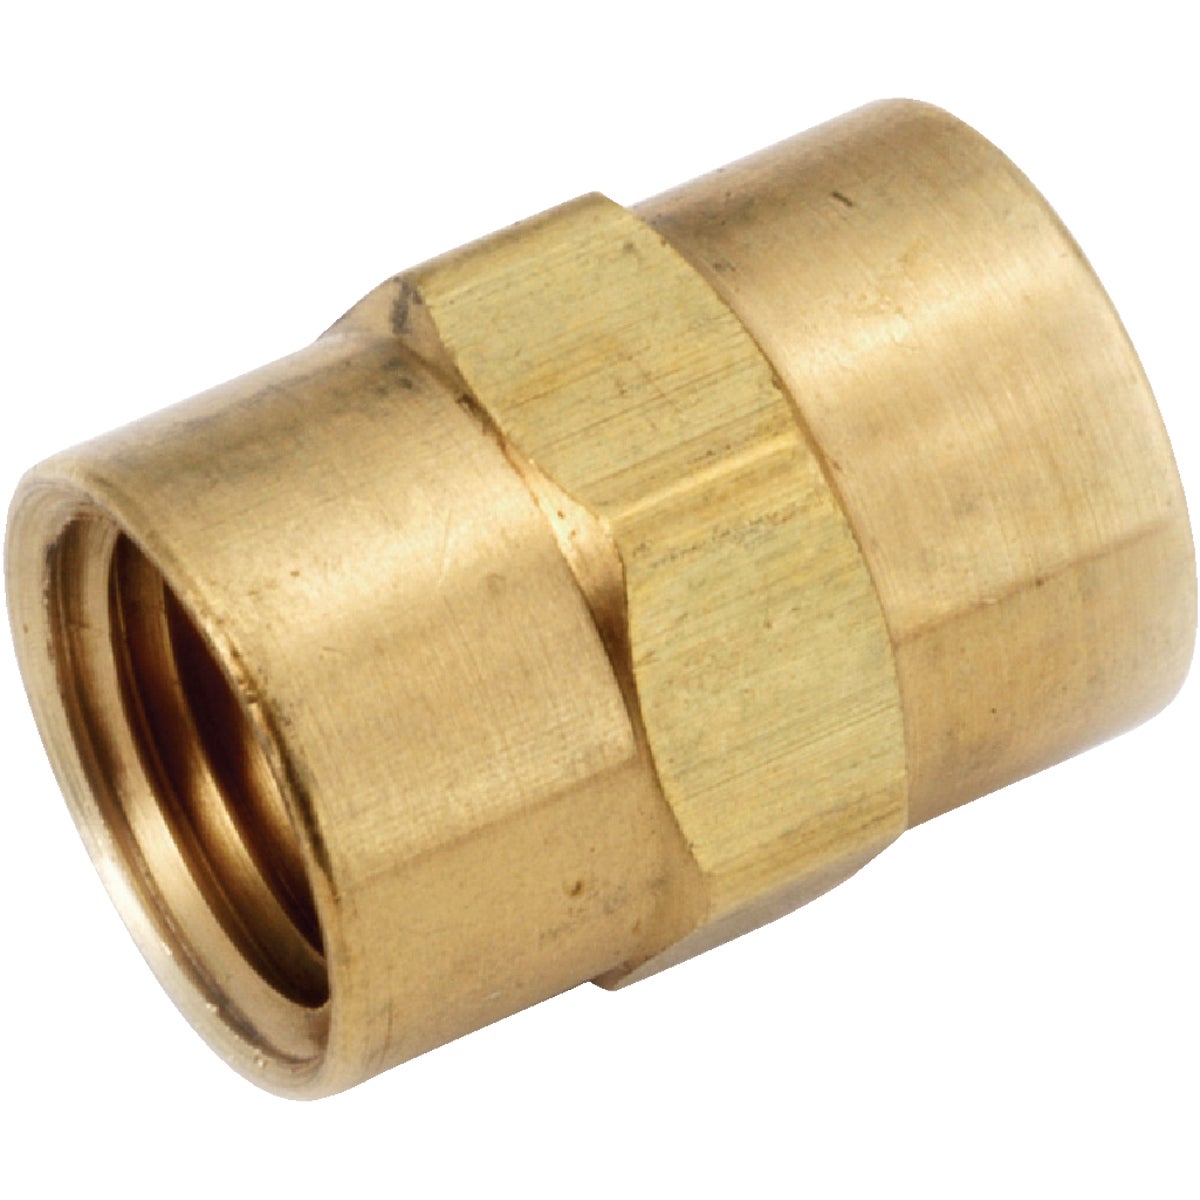 Anderson Metals 3/8 In. Yellow Brass Coupling